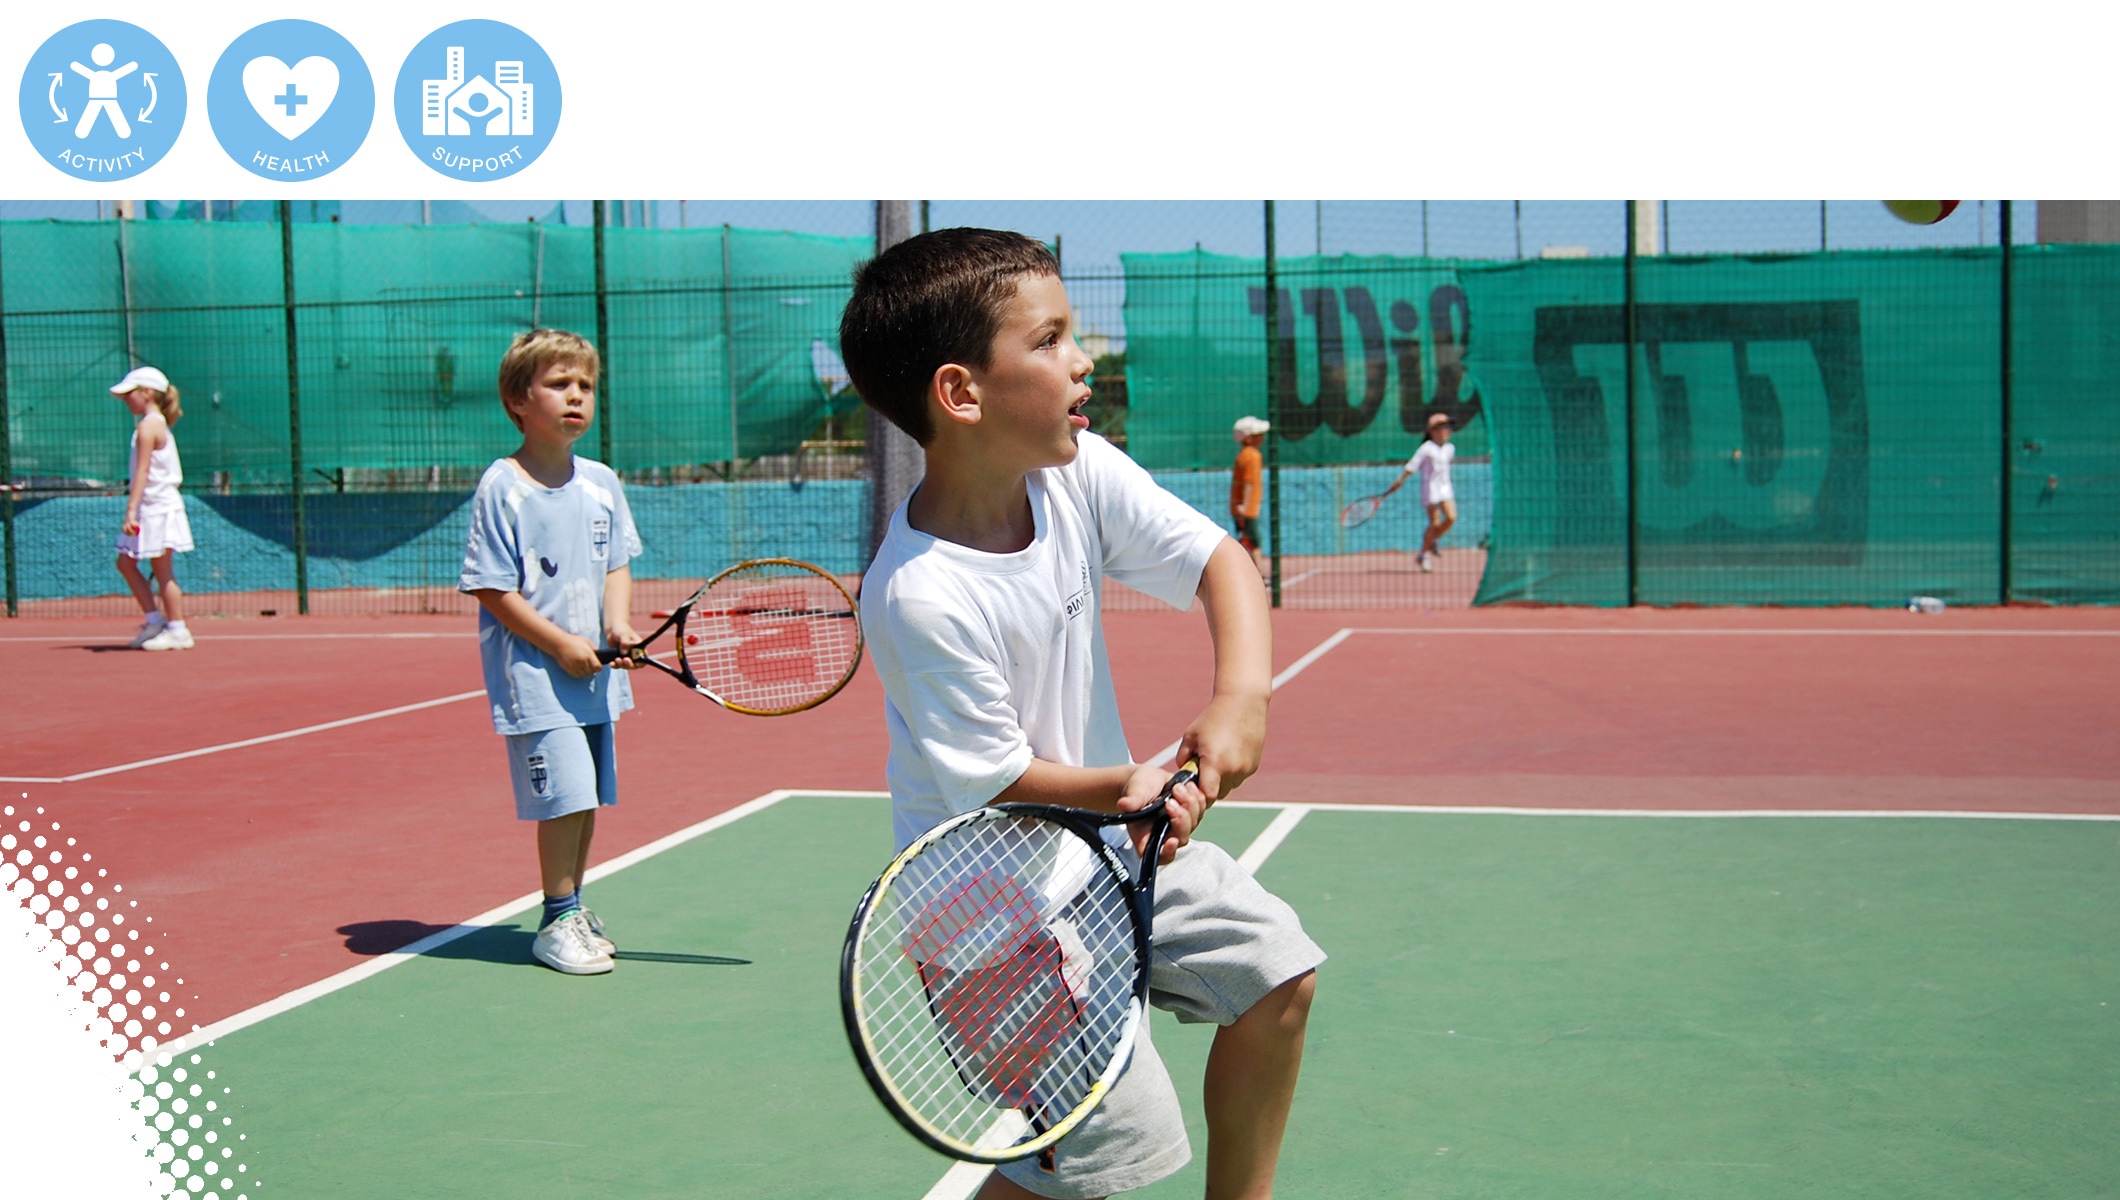 ITF TENNIS PLAY AND STAY CAMPAIGN